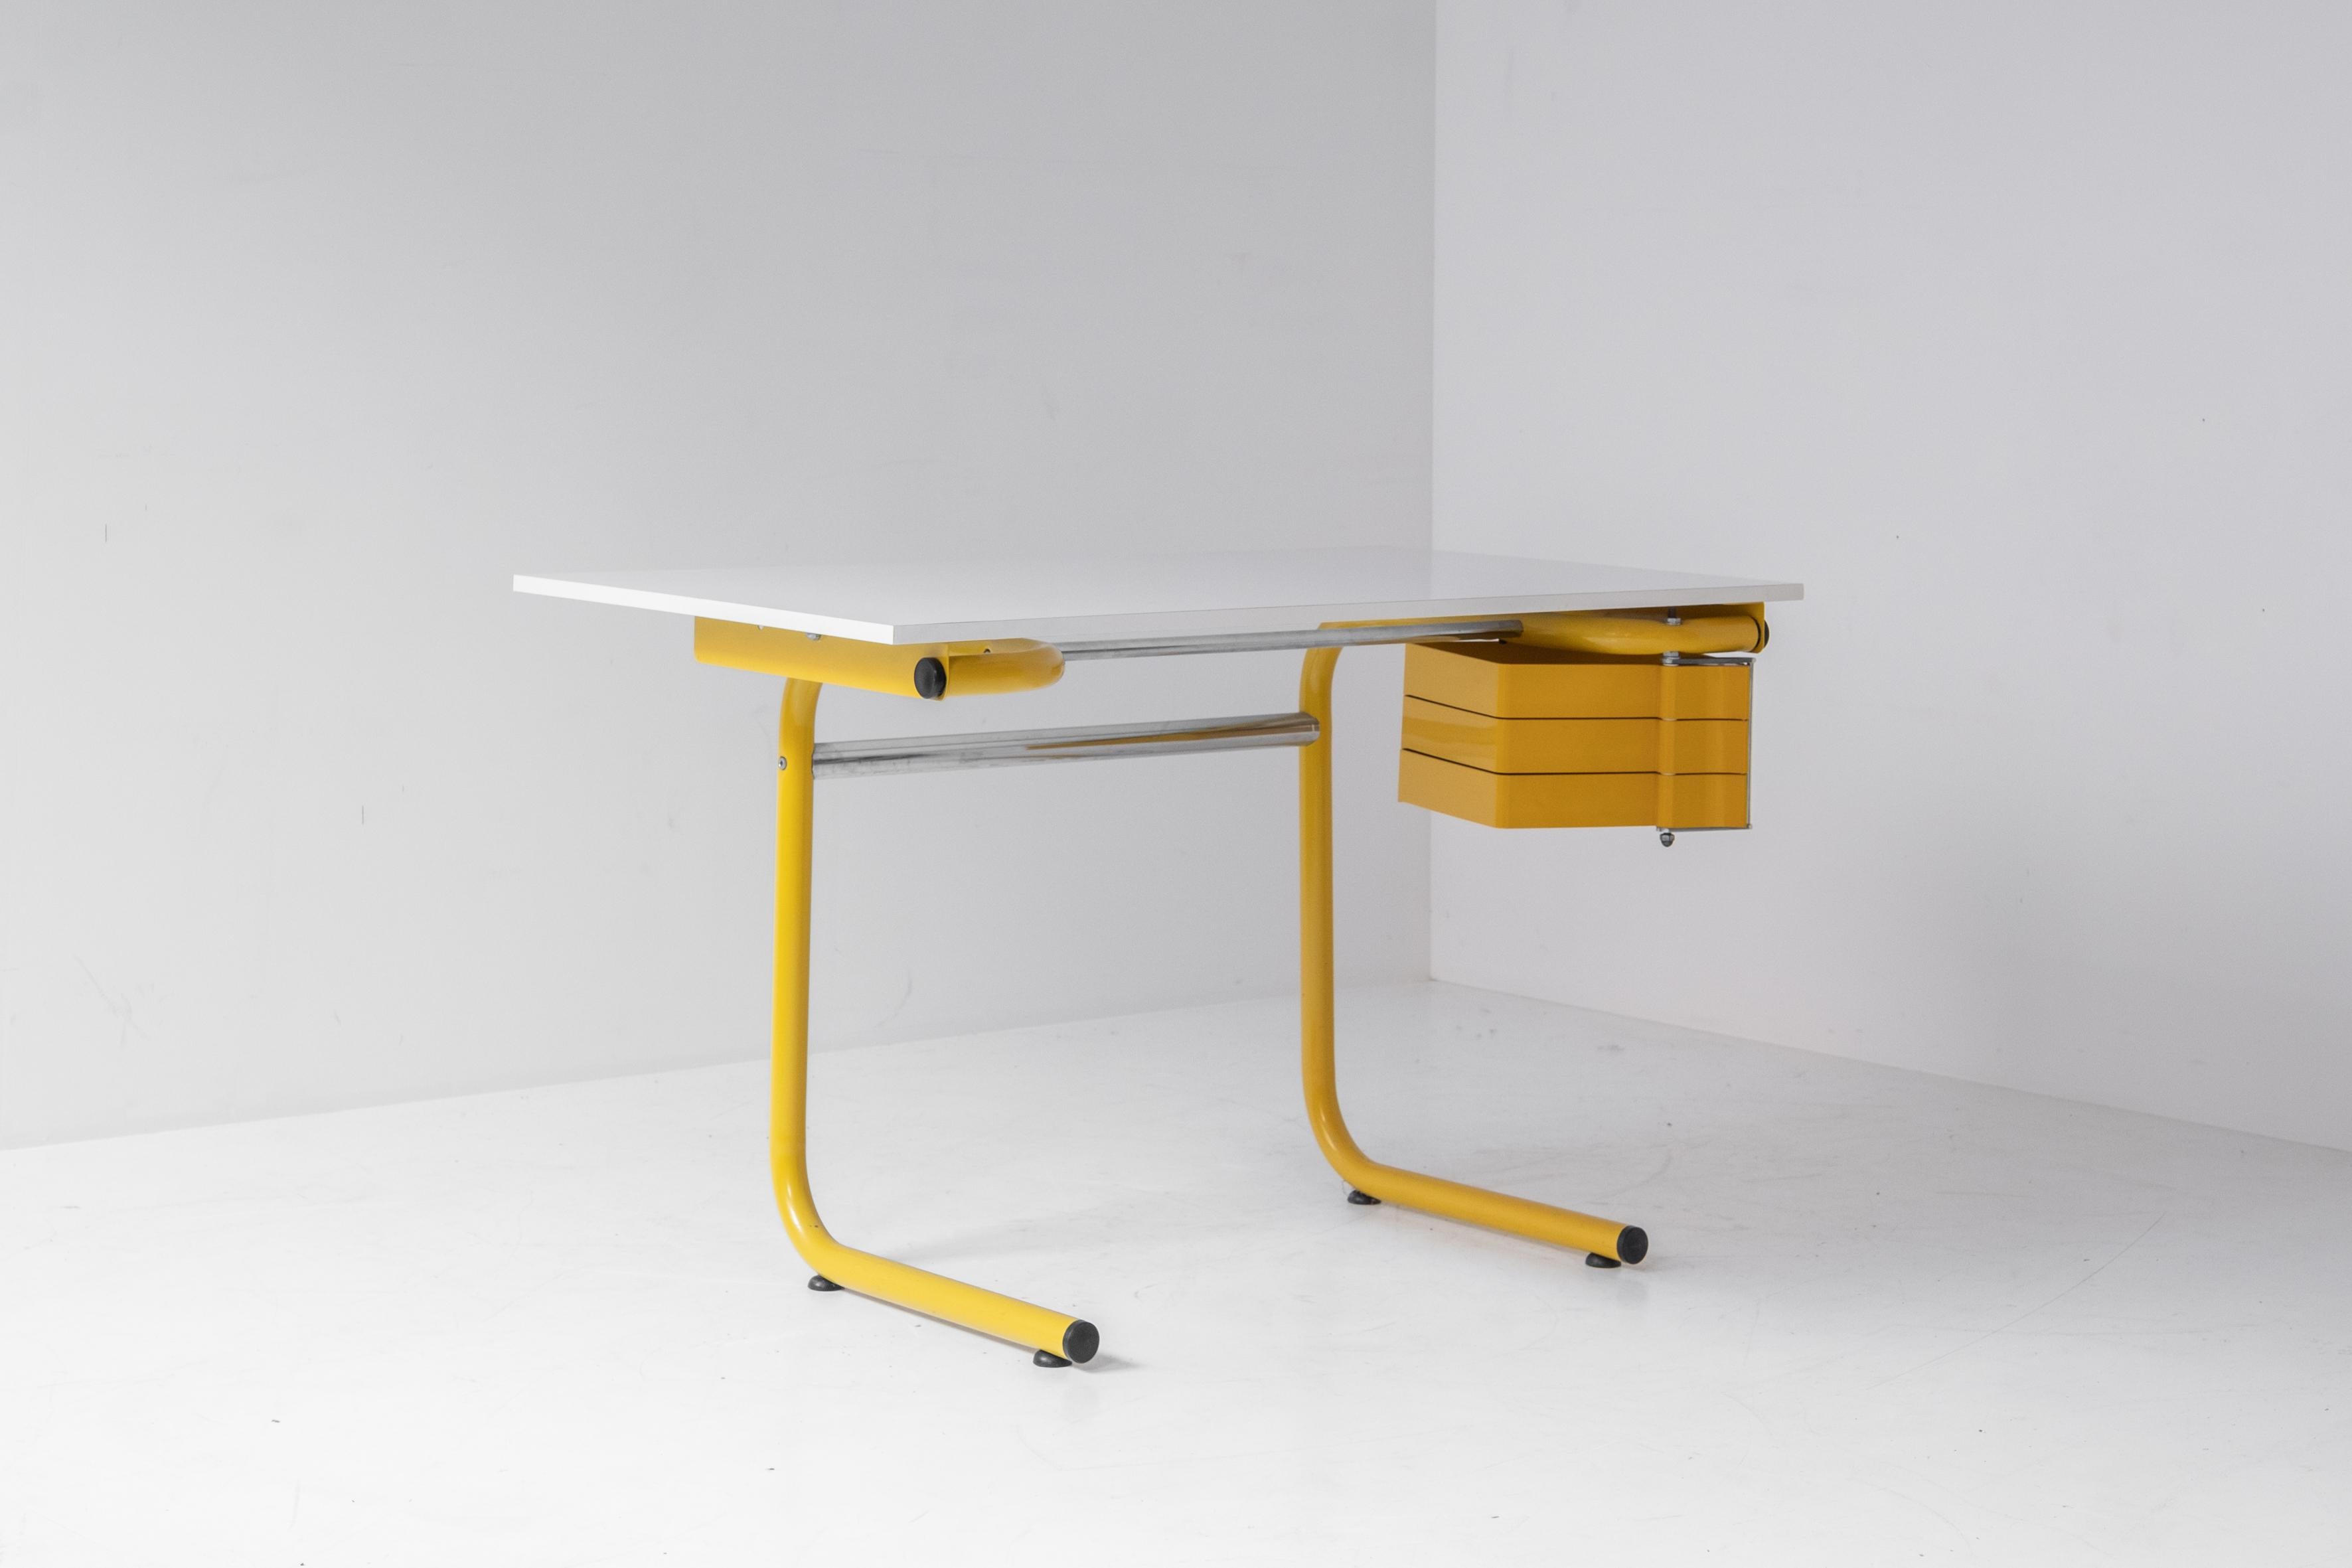 Late 20th Century Desk or Drafting Table by Joe Colombo for Bieffeplast, Italy, 1970s